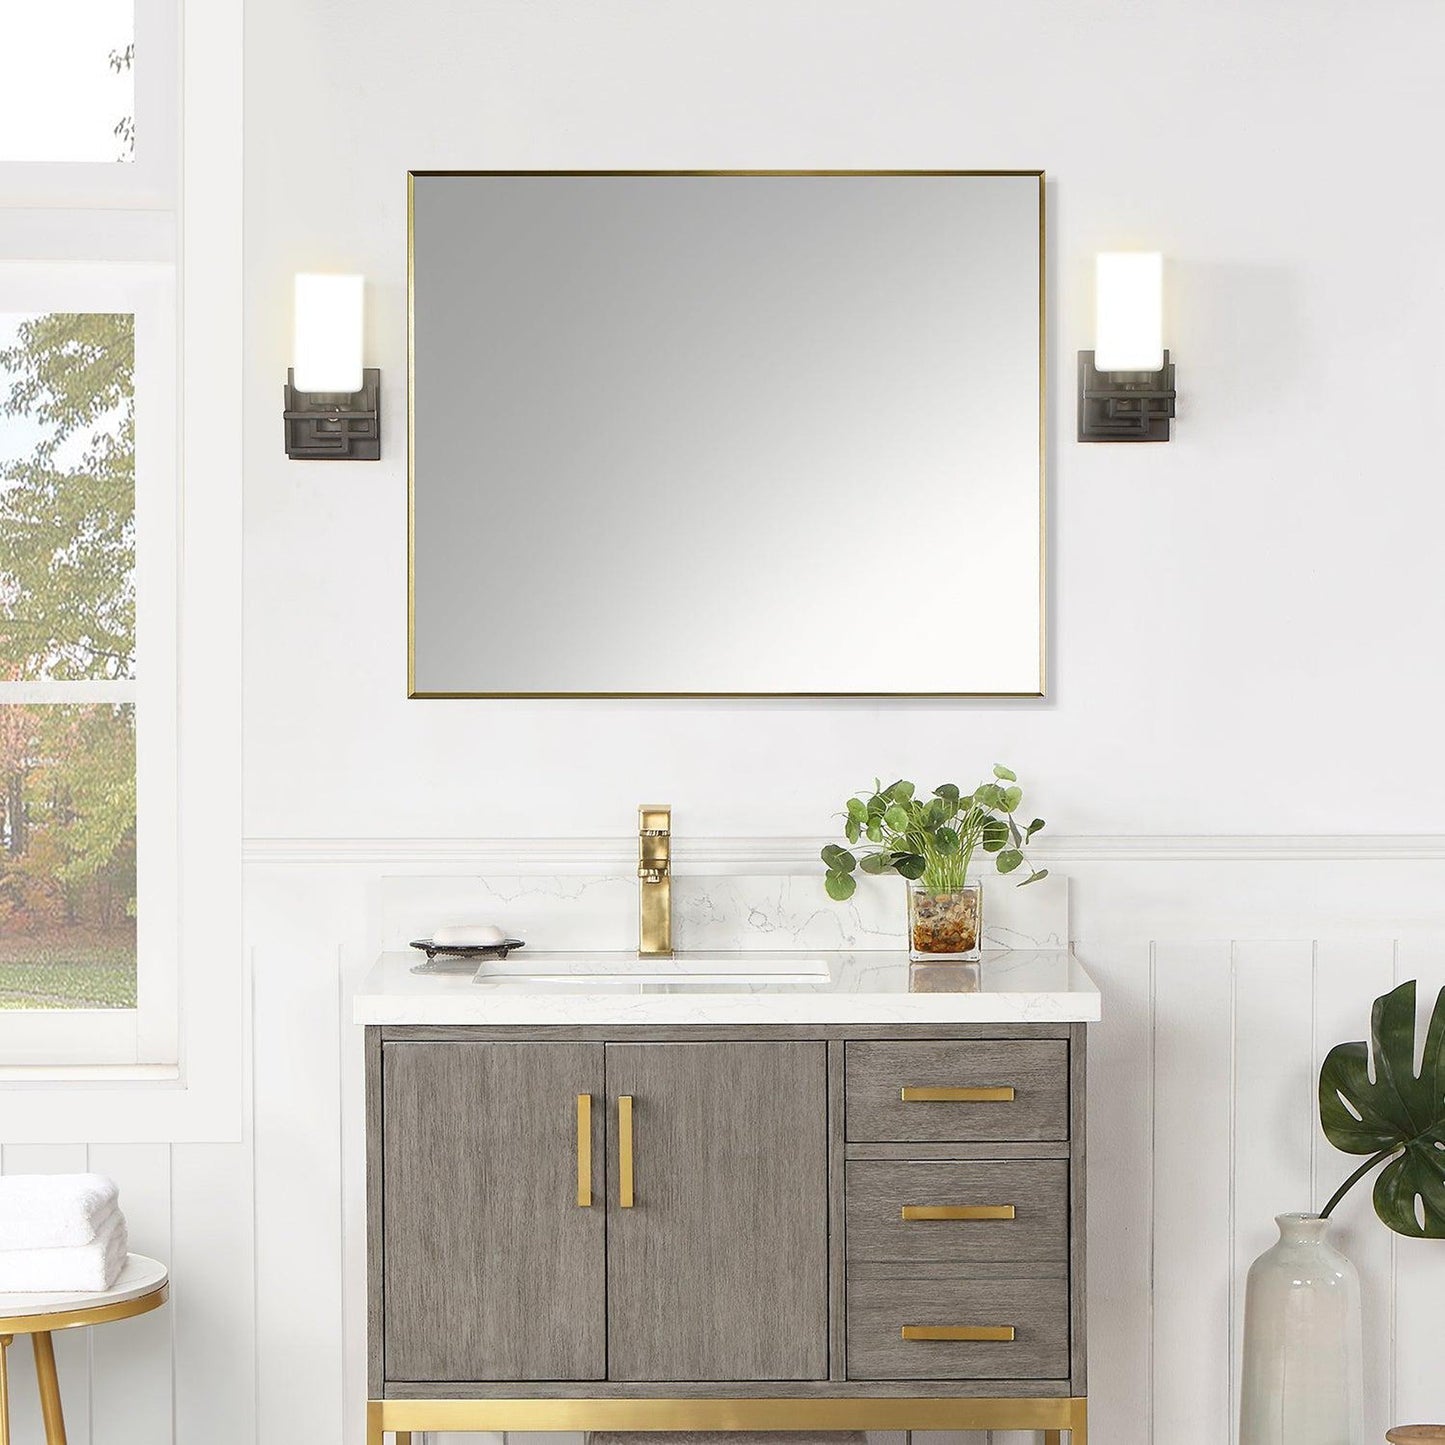 Altair Sassi 36" x 30" Rectangle Brushed Gold Aluminum Framed Wall-Mounted Mirror